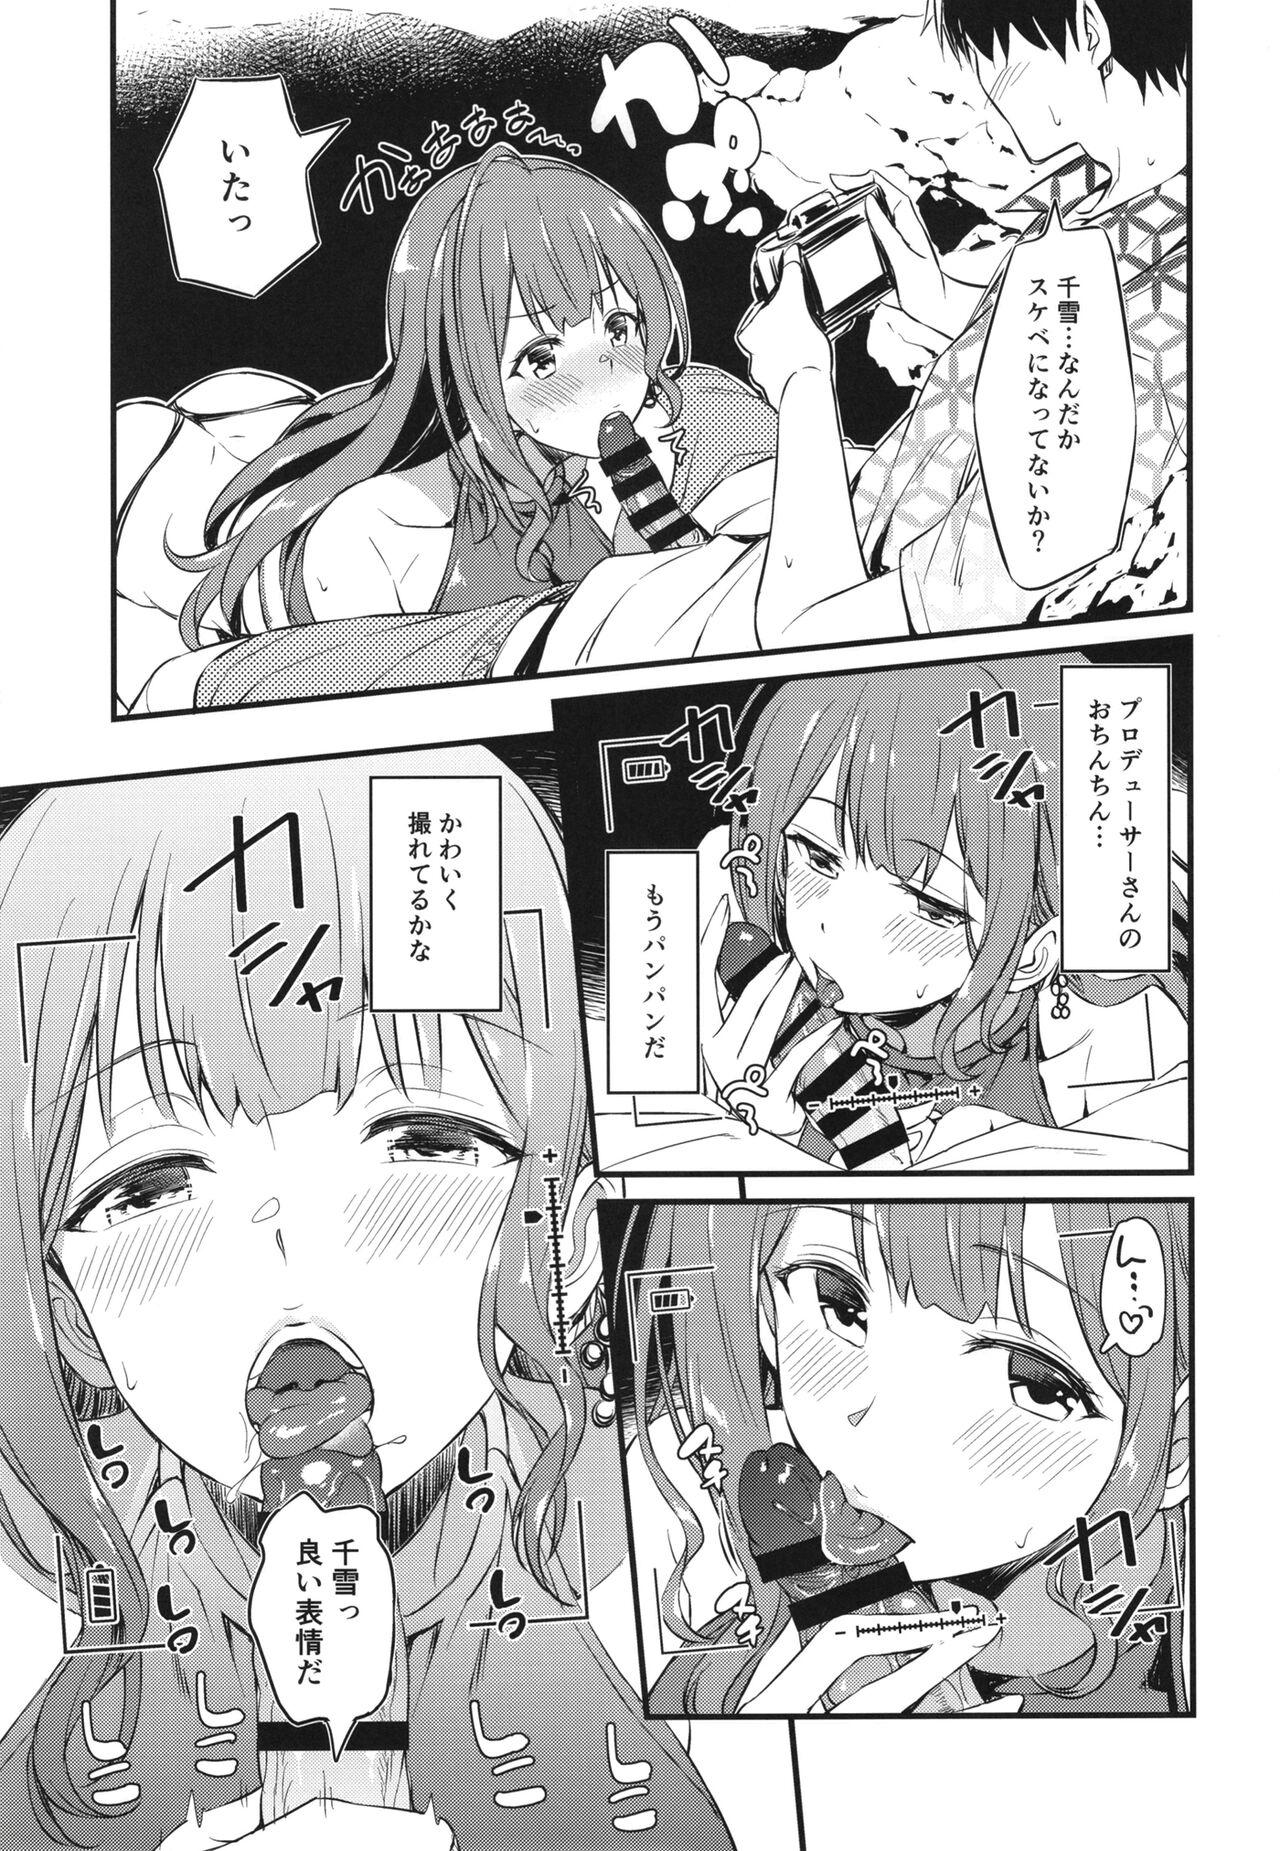 Special Locations 千雪さんのエッチな撮影会 - The idolmaster Parties - Page 9